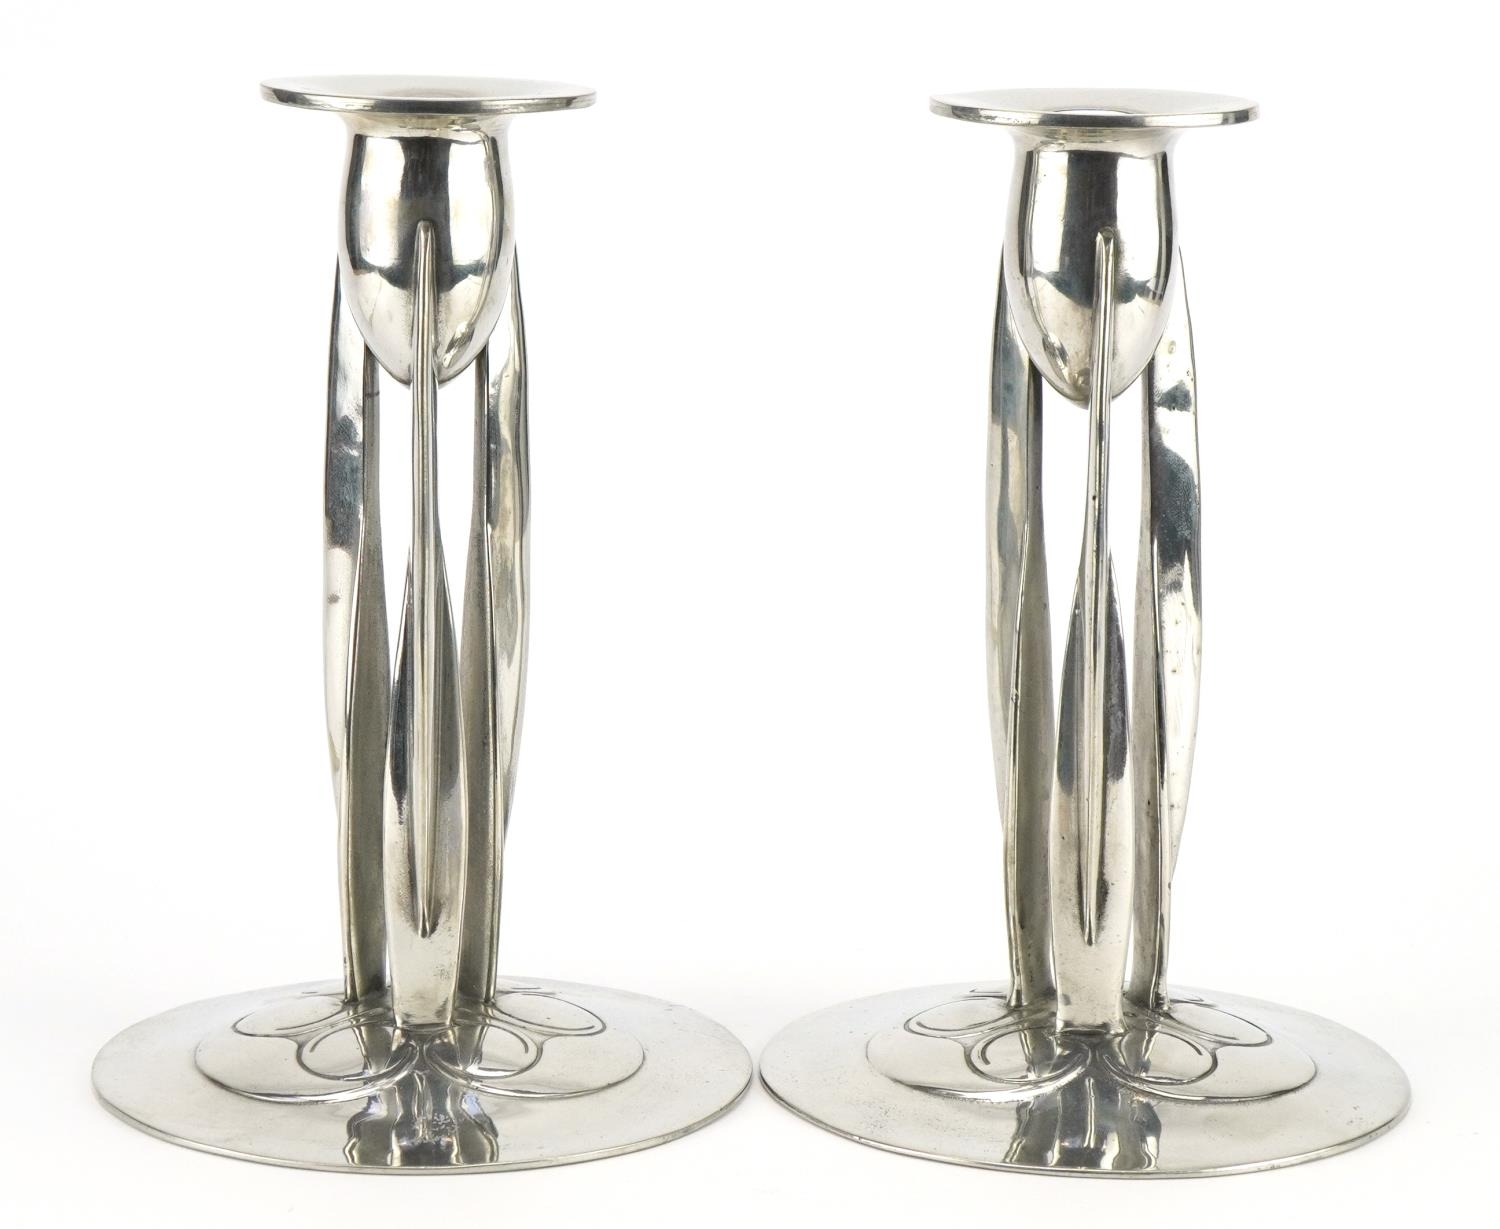 Archibald Knox for Liberty & Co, pair of Arts & Crafts English pewter candlesticks, impressed 0223 - Image 2 of 4